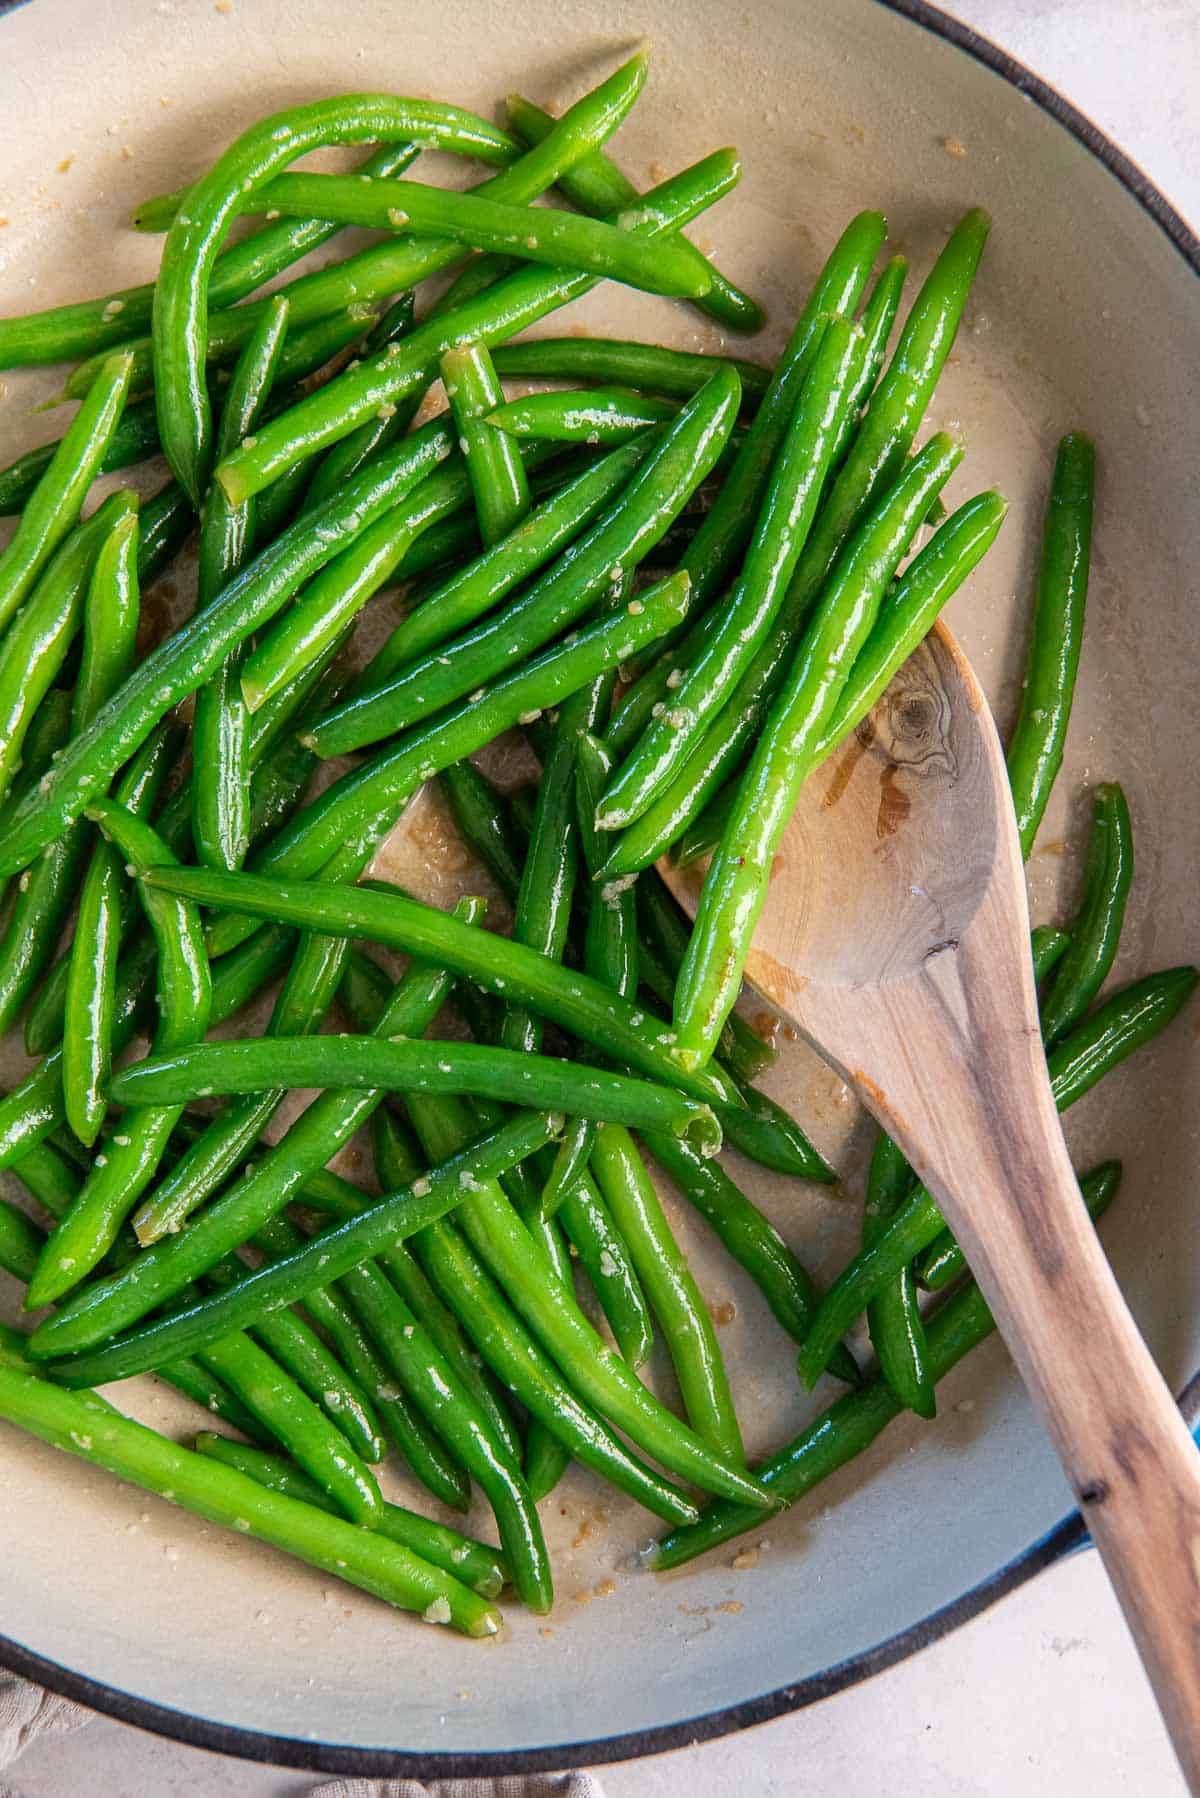 A wooden spoon resting in a pan of sauteed green beans.